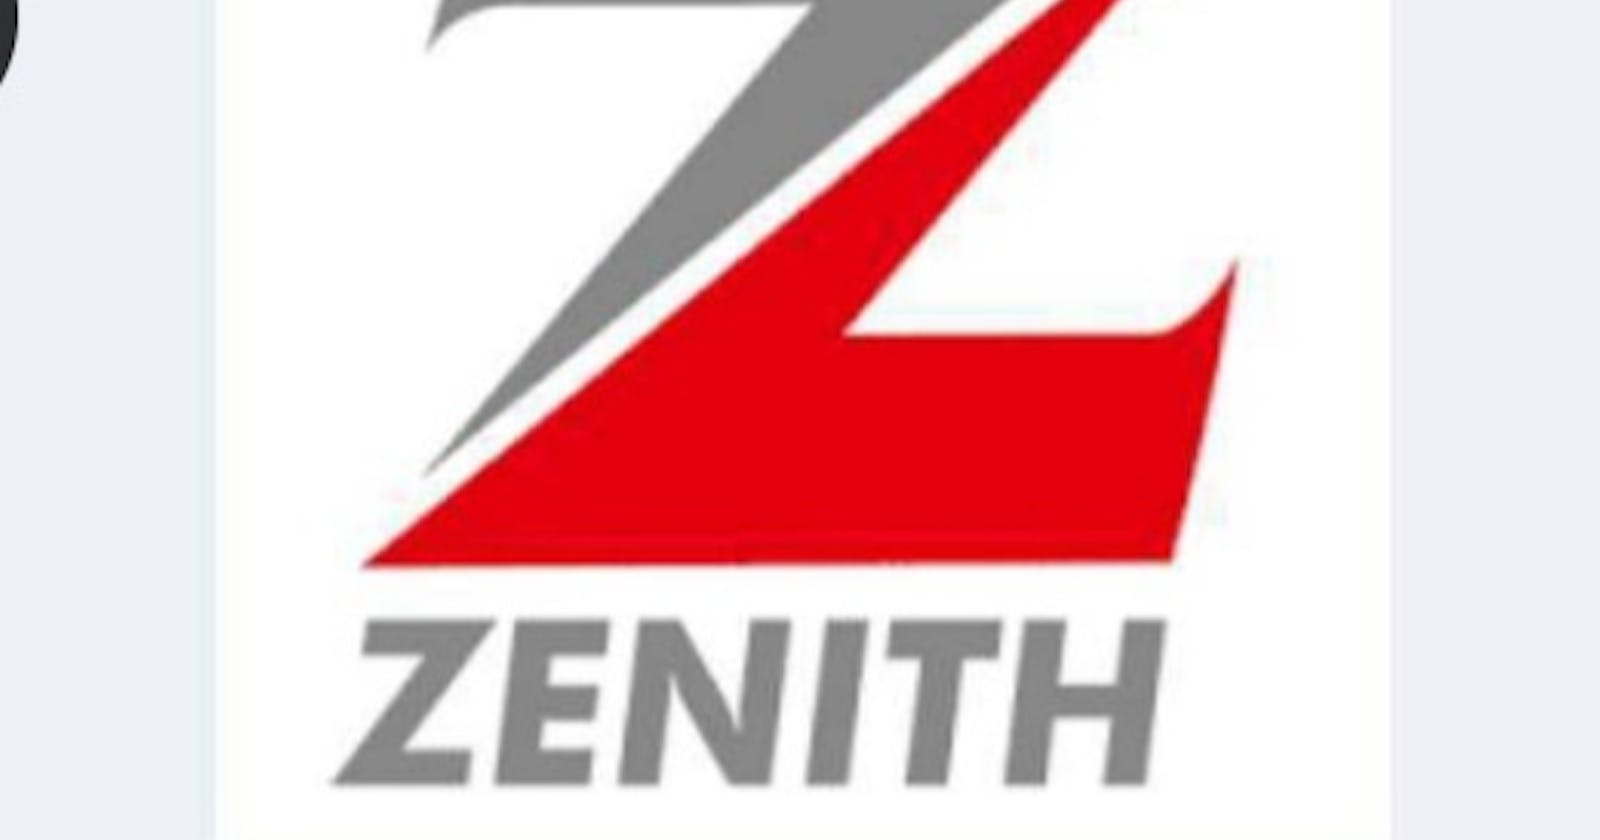 Creating Campaign to target customers (Zenith bank Campaign)